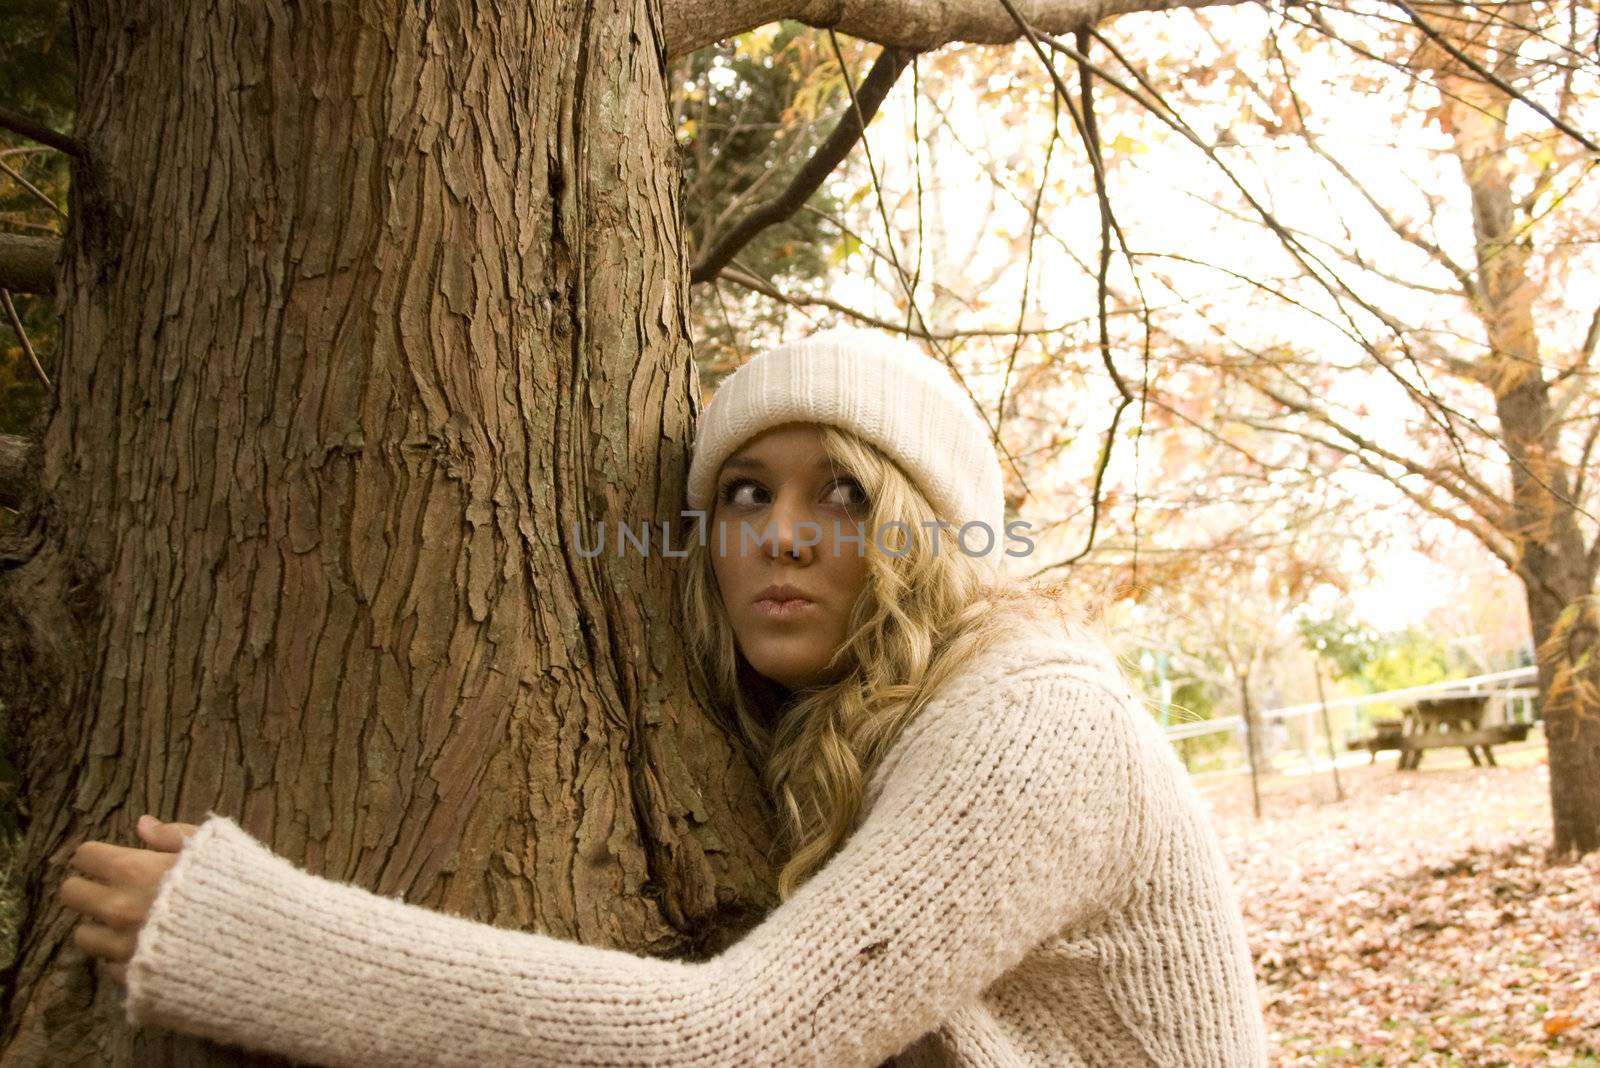 hugging a tree in the park